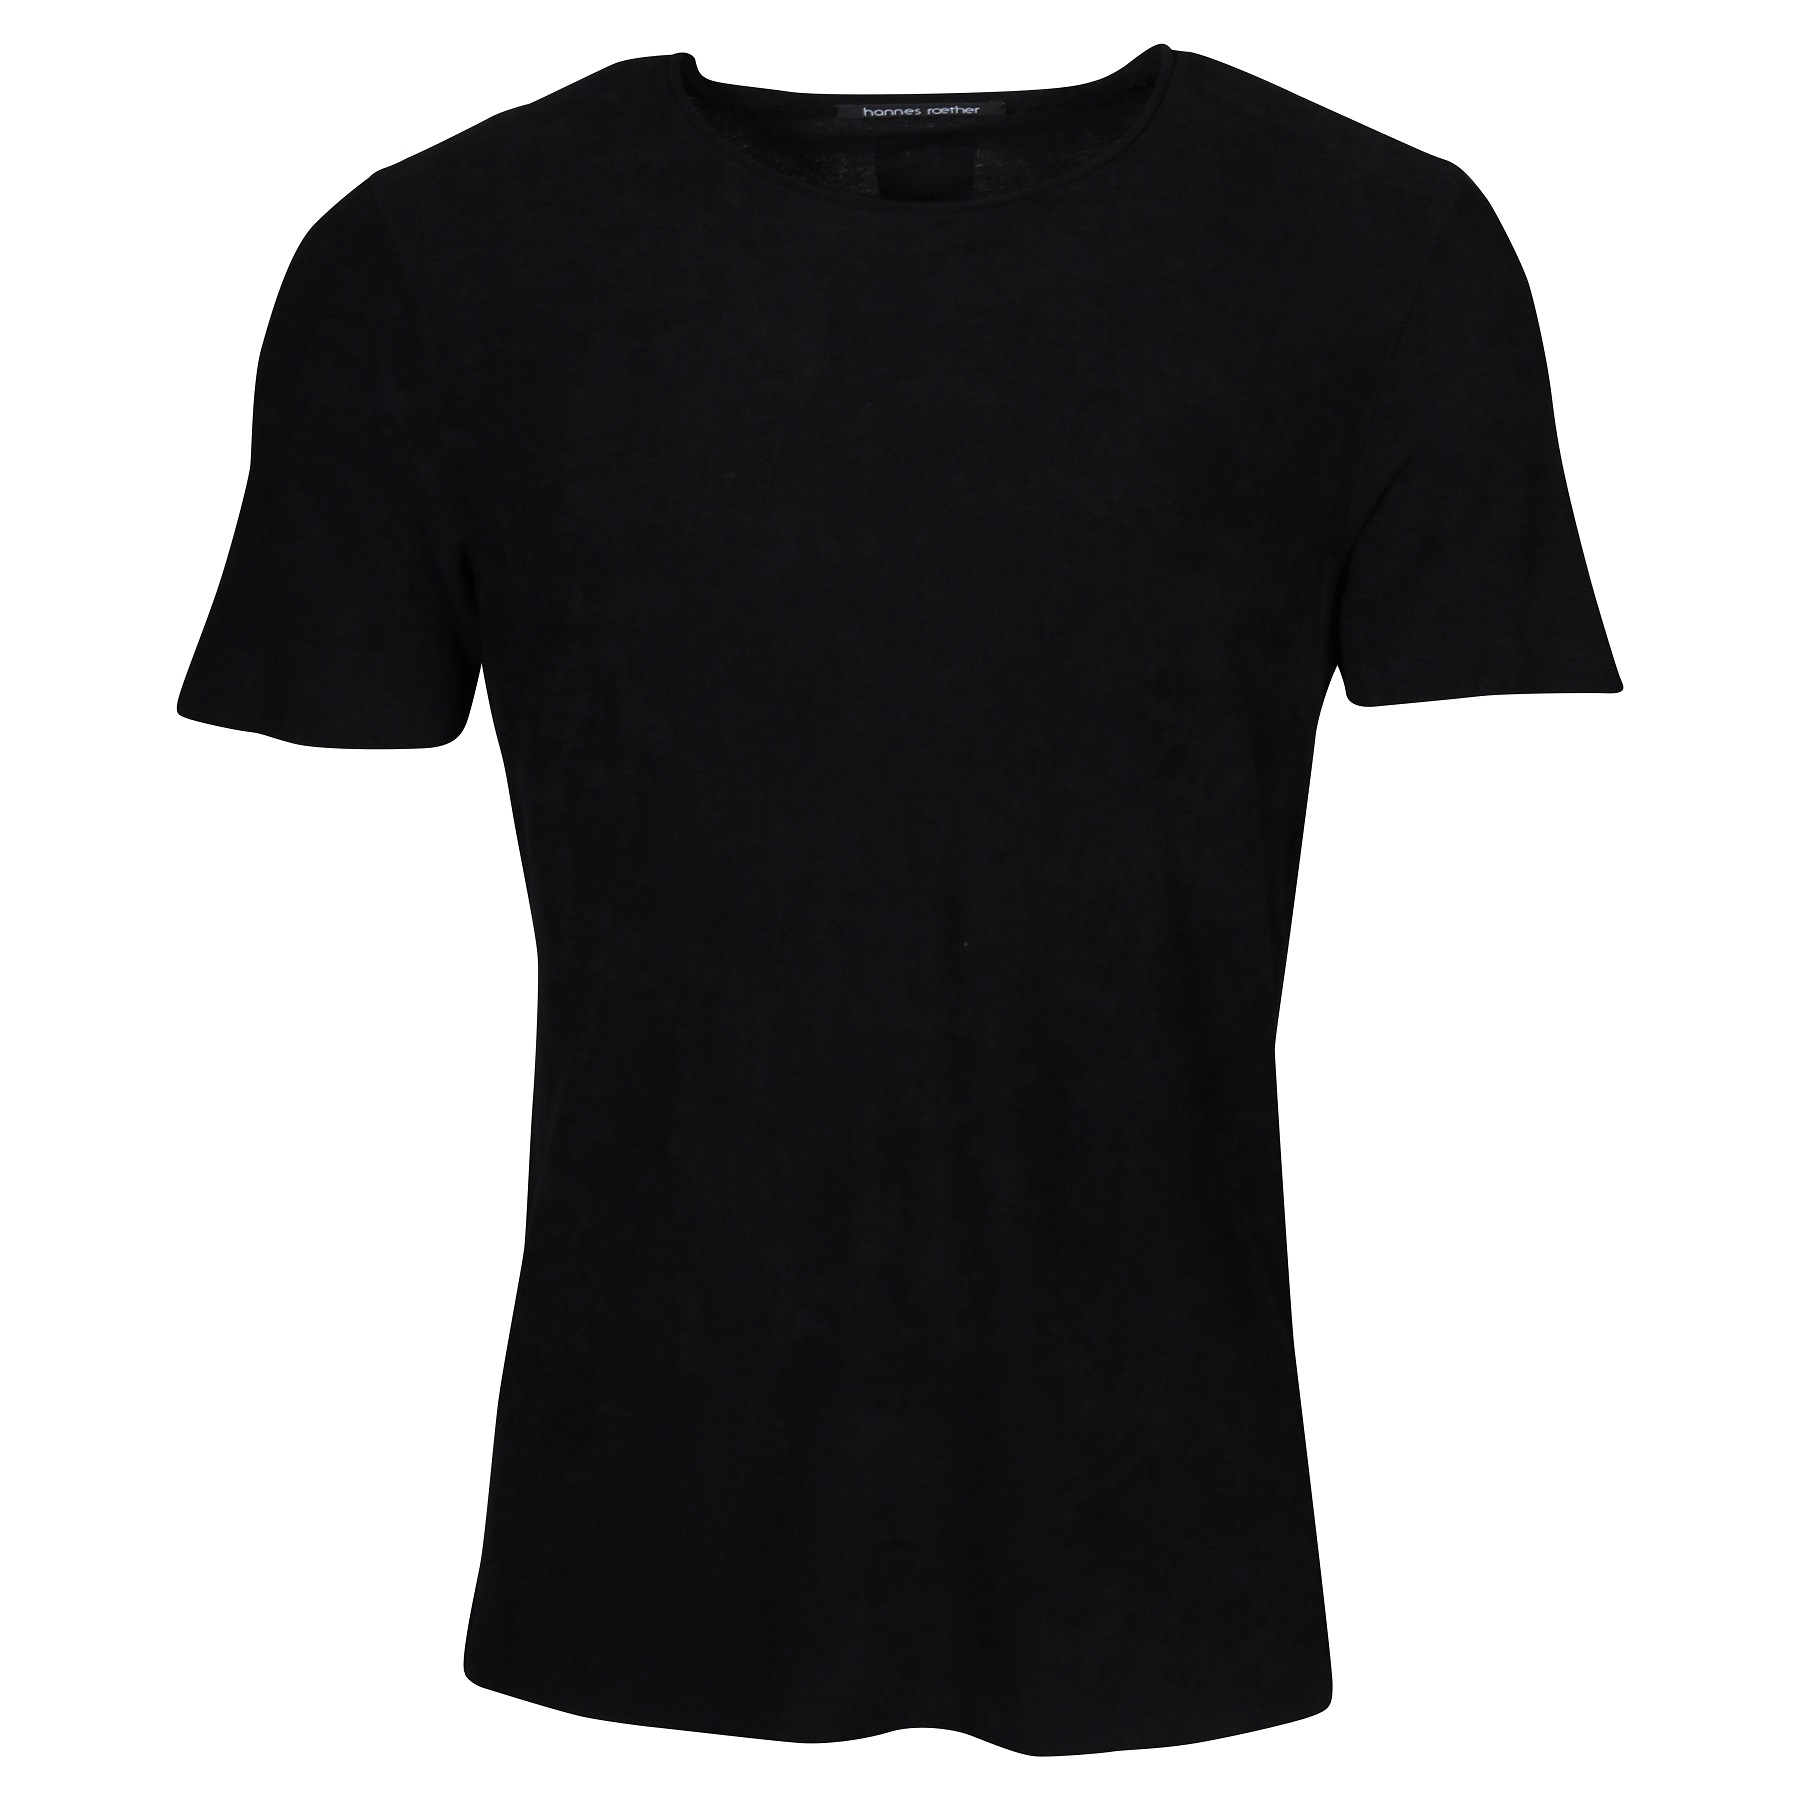 HANNES ROETHER Terry T-Shirt in Black XL